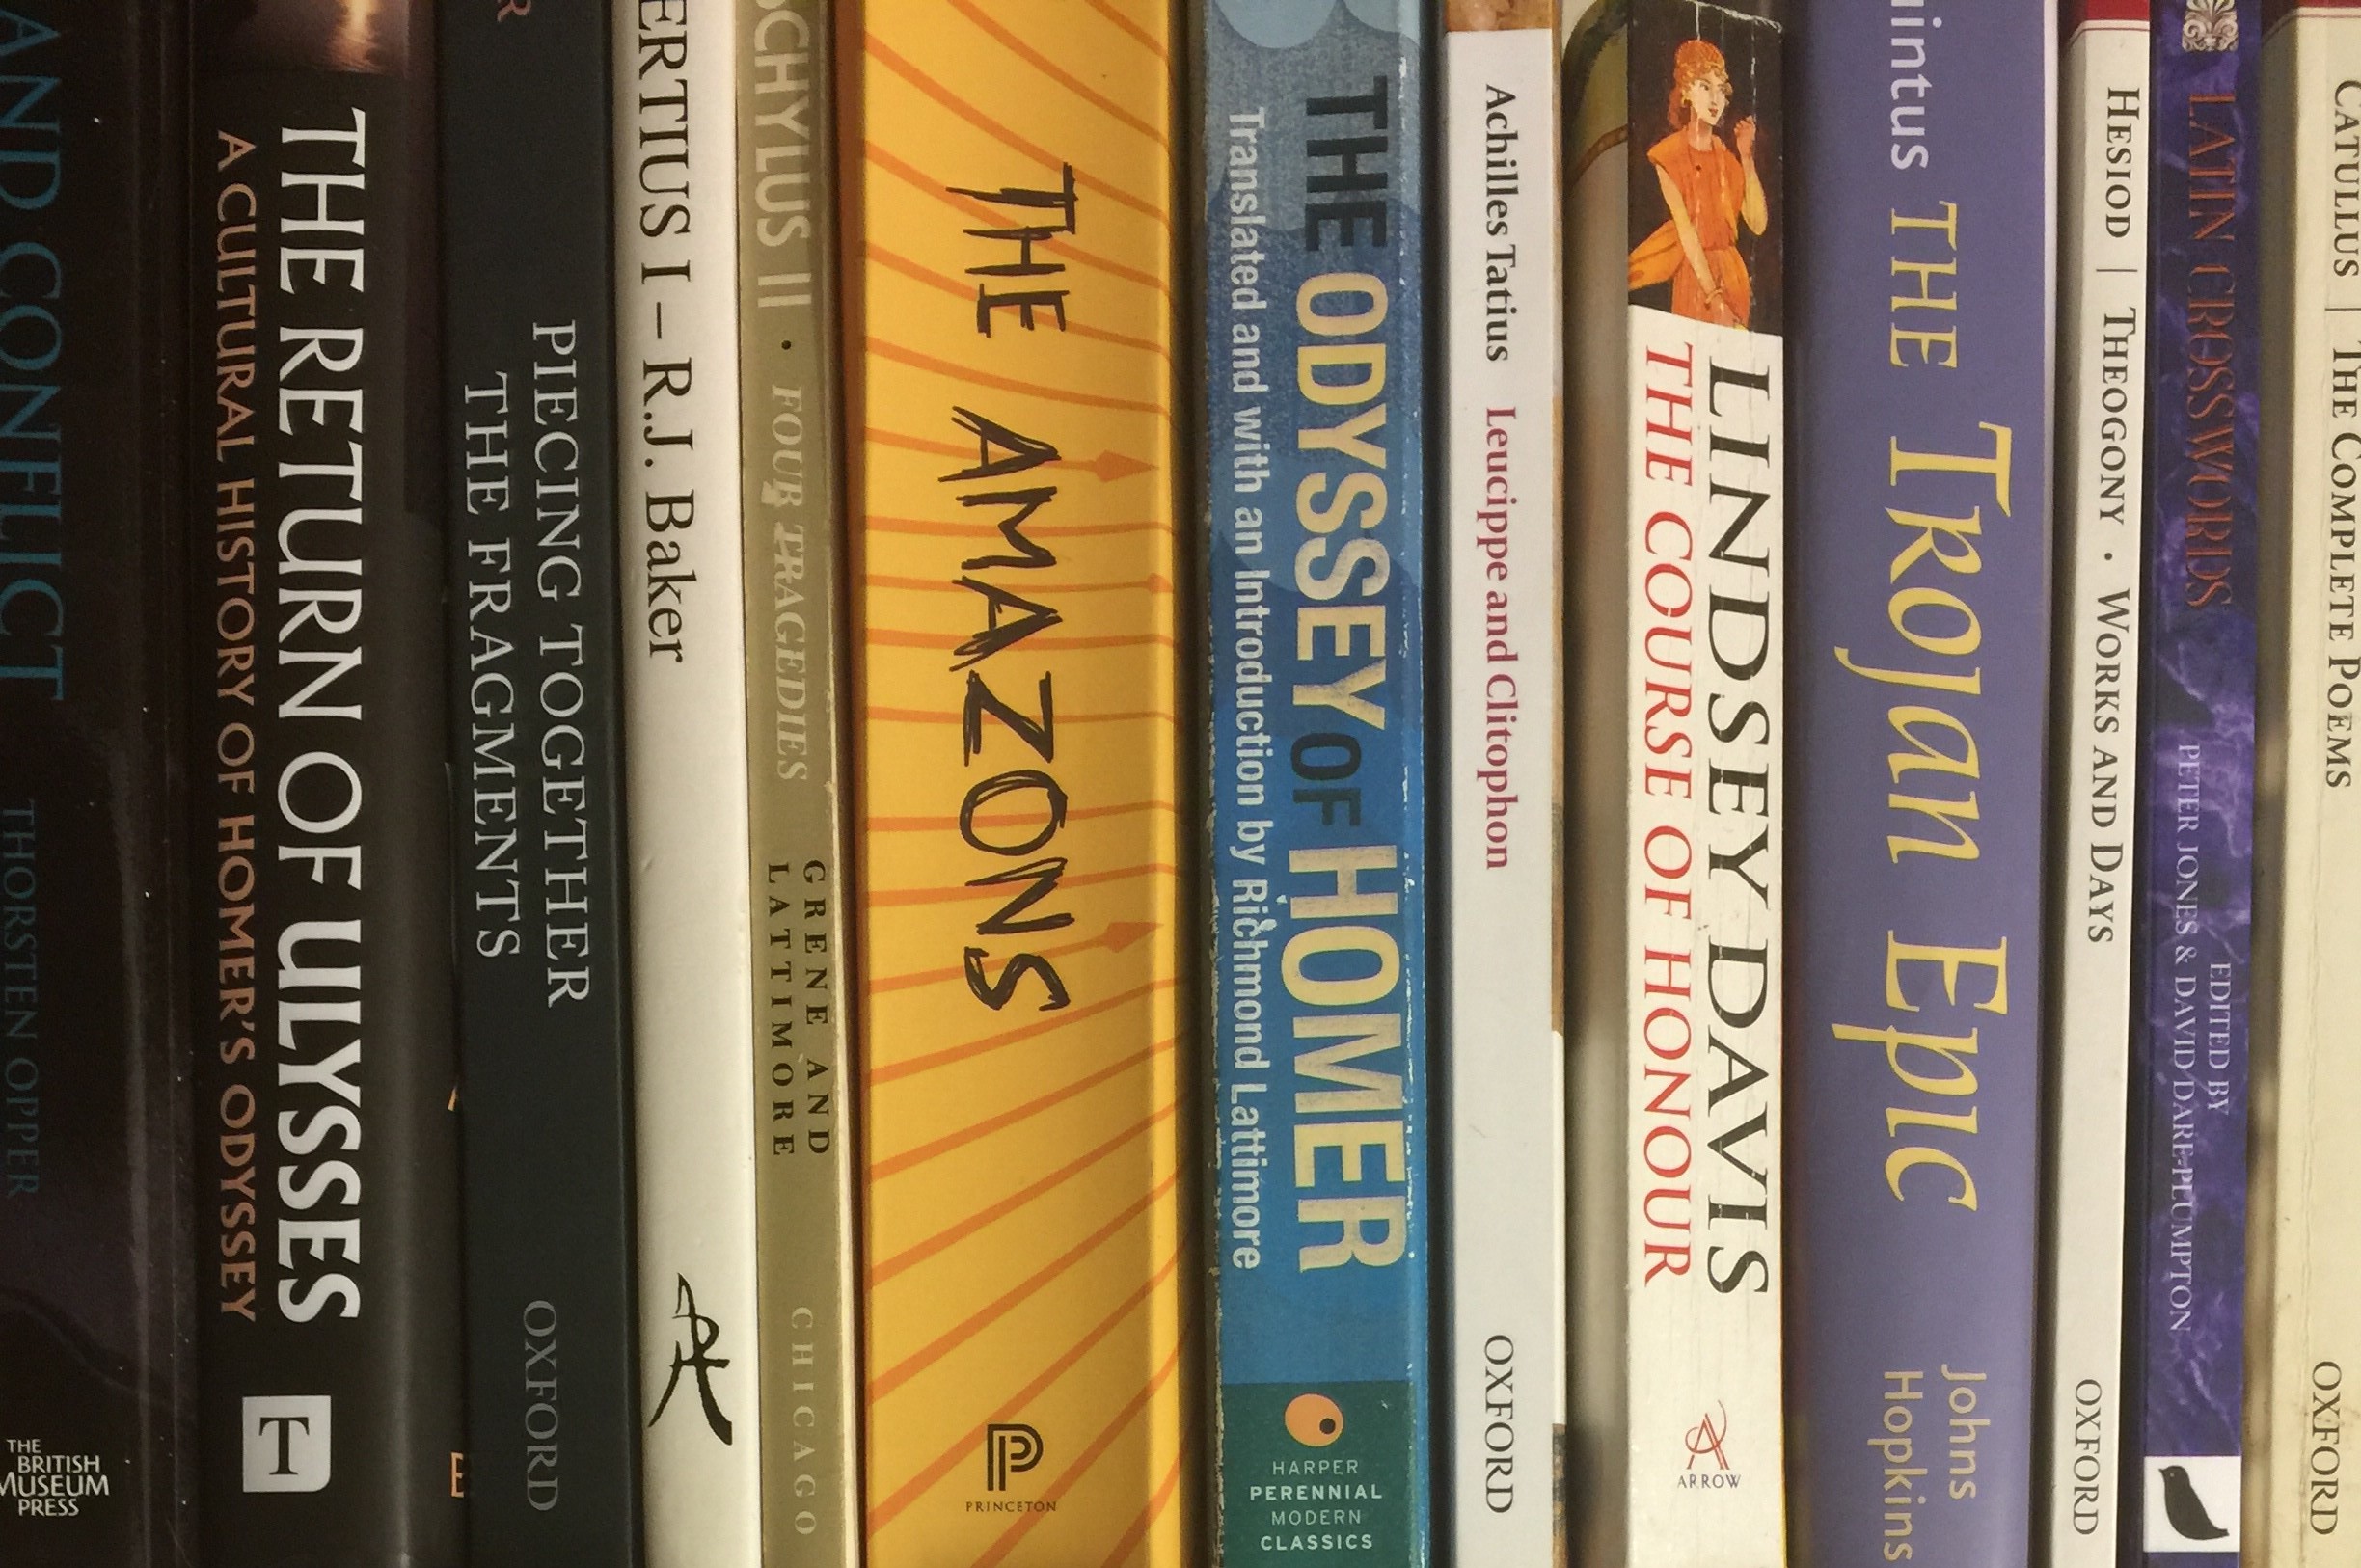 a photograph of classics books on a shelf, spines facing outwards.